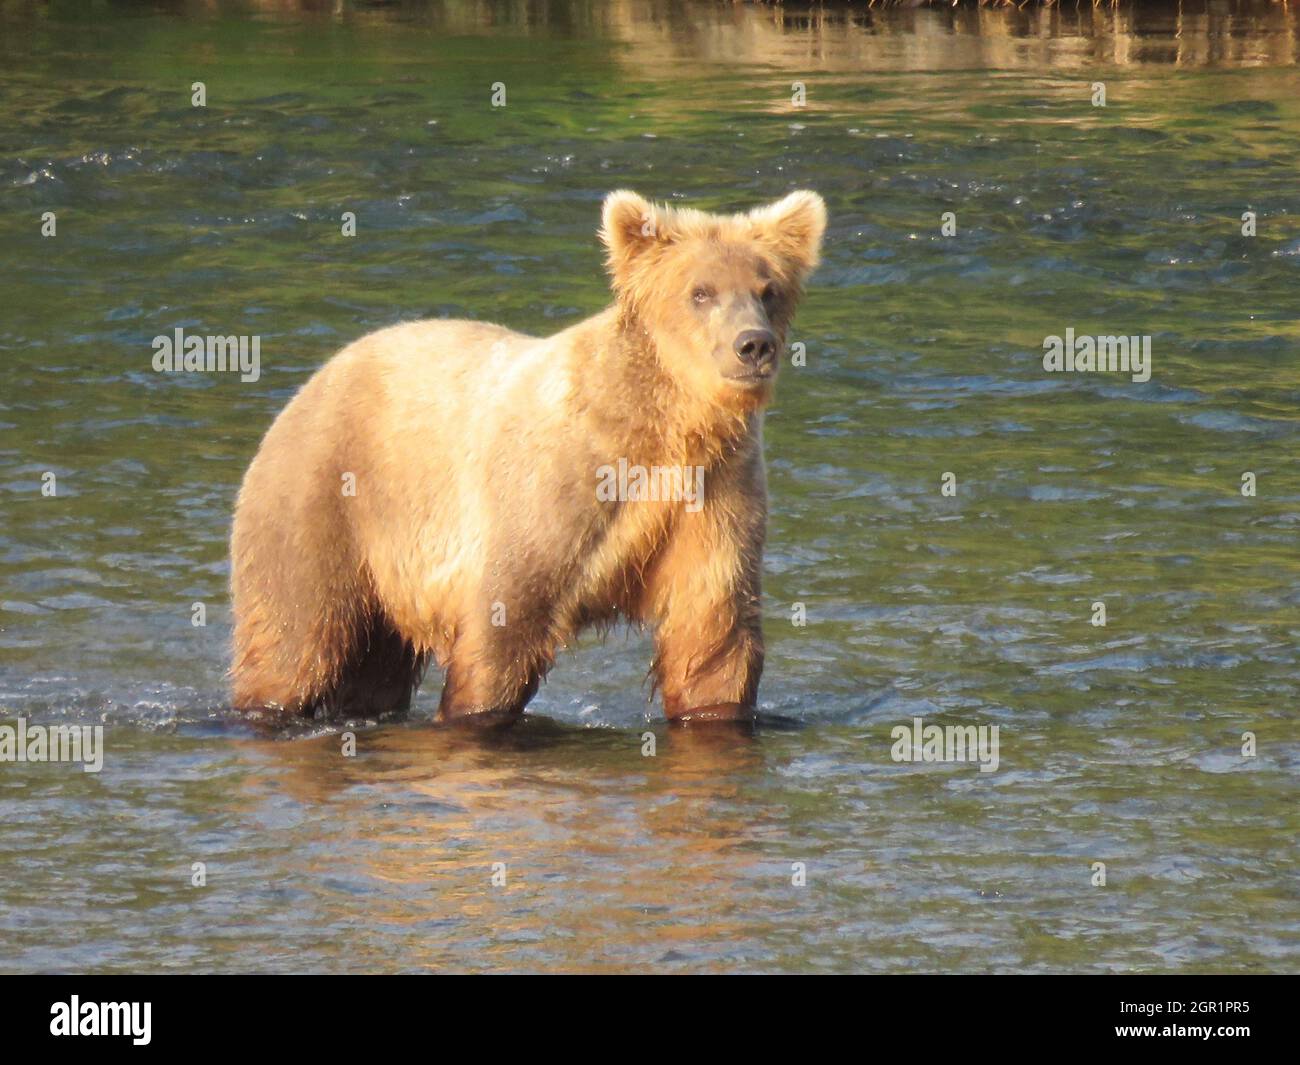 An adult brown bear known as 908 looks for salmon in the Brooks River lagoon during the feeding season in Katmai National Park and Preserve July 21, 2020 near King Salmon, Alaska. The park is holding the annual Fat Bear contest to decide which bear gained the most weight during the summer feeding season. Stock Photo